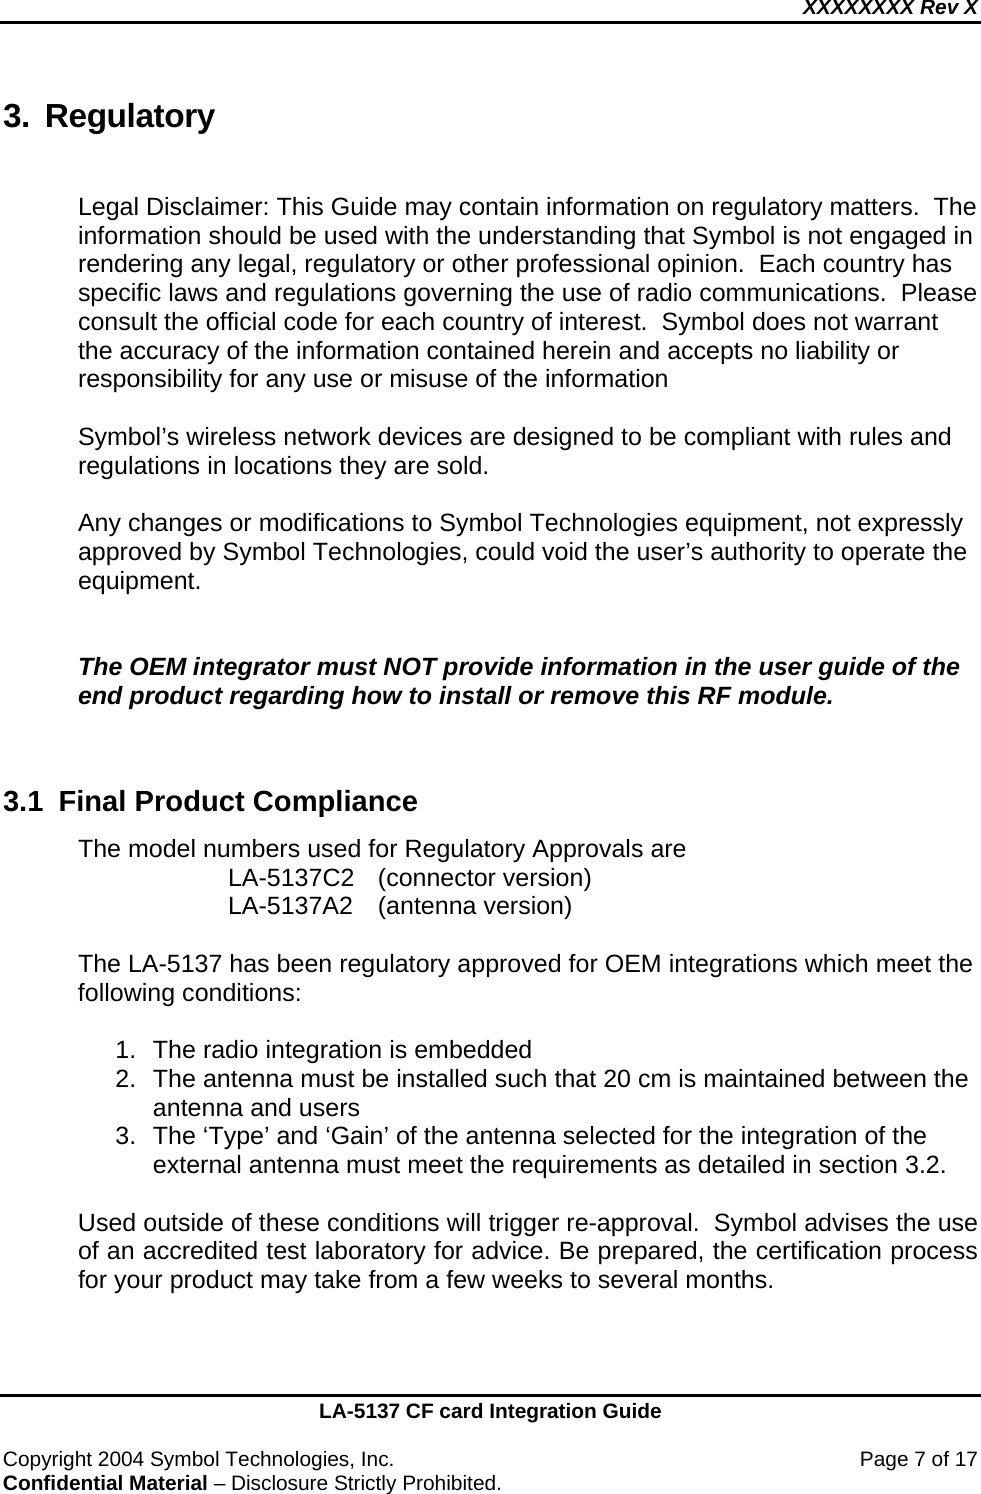 XXXXXXXX Rev X    LA-5137 CF card Integration Guide  Copyright 2004 Symbol Technologies, Inc.    Page 7 of 17 Confidential Material – Disclosure Strictly Prohibited. 3. Regulatory  Legal Disclaimer: This Guide may contain information on regulatory matters.  The information should be used with the understanding that Symbol is not engaged in rendering any legal, regulatory or other professional opinion.  Each country has specific laws and regulations governing the use of radio communications.  Please consult the official code for each country of interest.  Symbol does not warrant the accuracy of the information contained herein and accepts no liability or responsibility for any use or misuse of the information  Symbol’s wireless network devices are designed to be compliant with rules and regulations in locations they are sold.   Any changes or modifications to Symbol Technologies equipment, not expressly approved by Symbol Technologies, could void the user’s authority to operate the equipment.   The OEM integrator must NOT provide information in the user guide of the end product regarding how to install or remove this RF module.   3.1  Final Product Compliance The model numbers used for Regulatory Approvals are   LA-5137C2 (connector version)   LA-5137A2 (antenna version)  The LA-5137 has been regulatory approved for OEM integrations which meet the following conditions:  1.  The radio integration is embedded 2.  The antenna must be installed such that 20 cm is maintained between the antenna and users 3.  The ‘Type’ and ‘Gain’ of the antenna selected for the integration of the external antenna must meet the requirements as detailed in section 3.2.  Used outside of these conditions will trigger re-approval.  Symbol advises the use of an accredited test laboratory for advice. Be prepared, the certification process for your product may take from a few weeks to several months.   